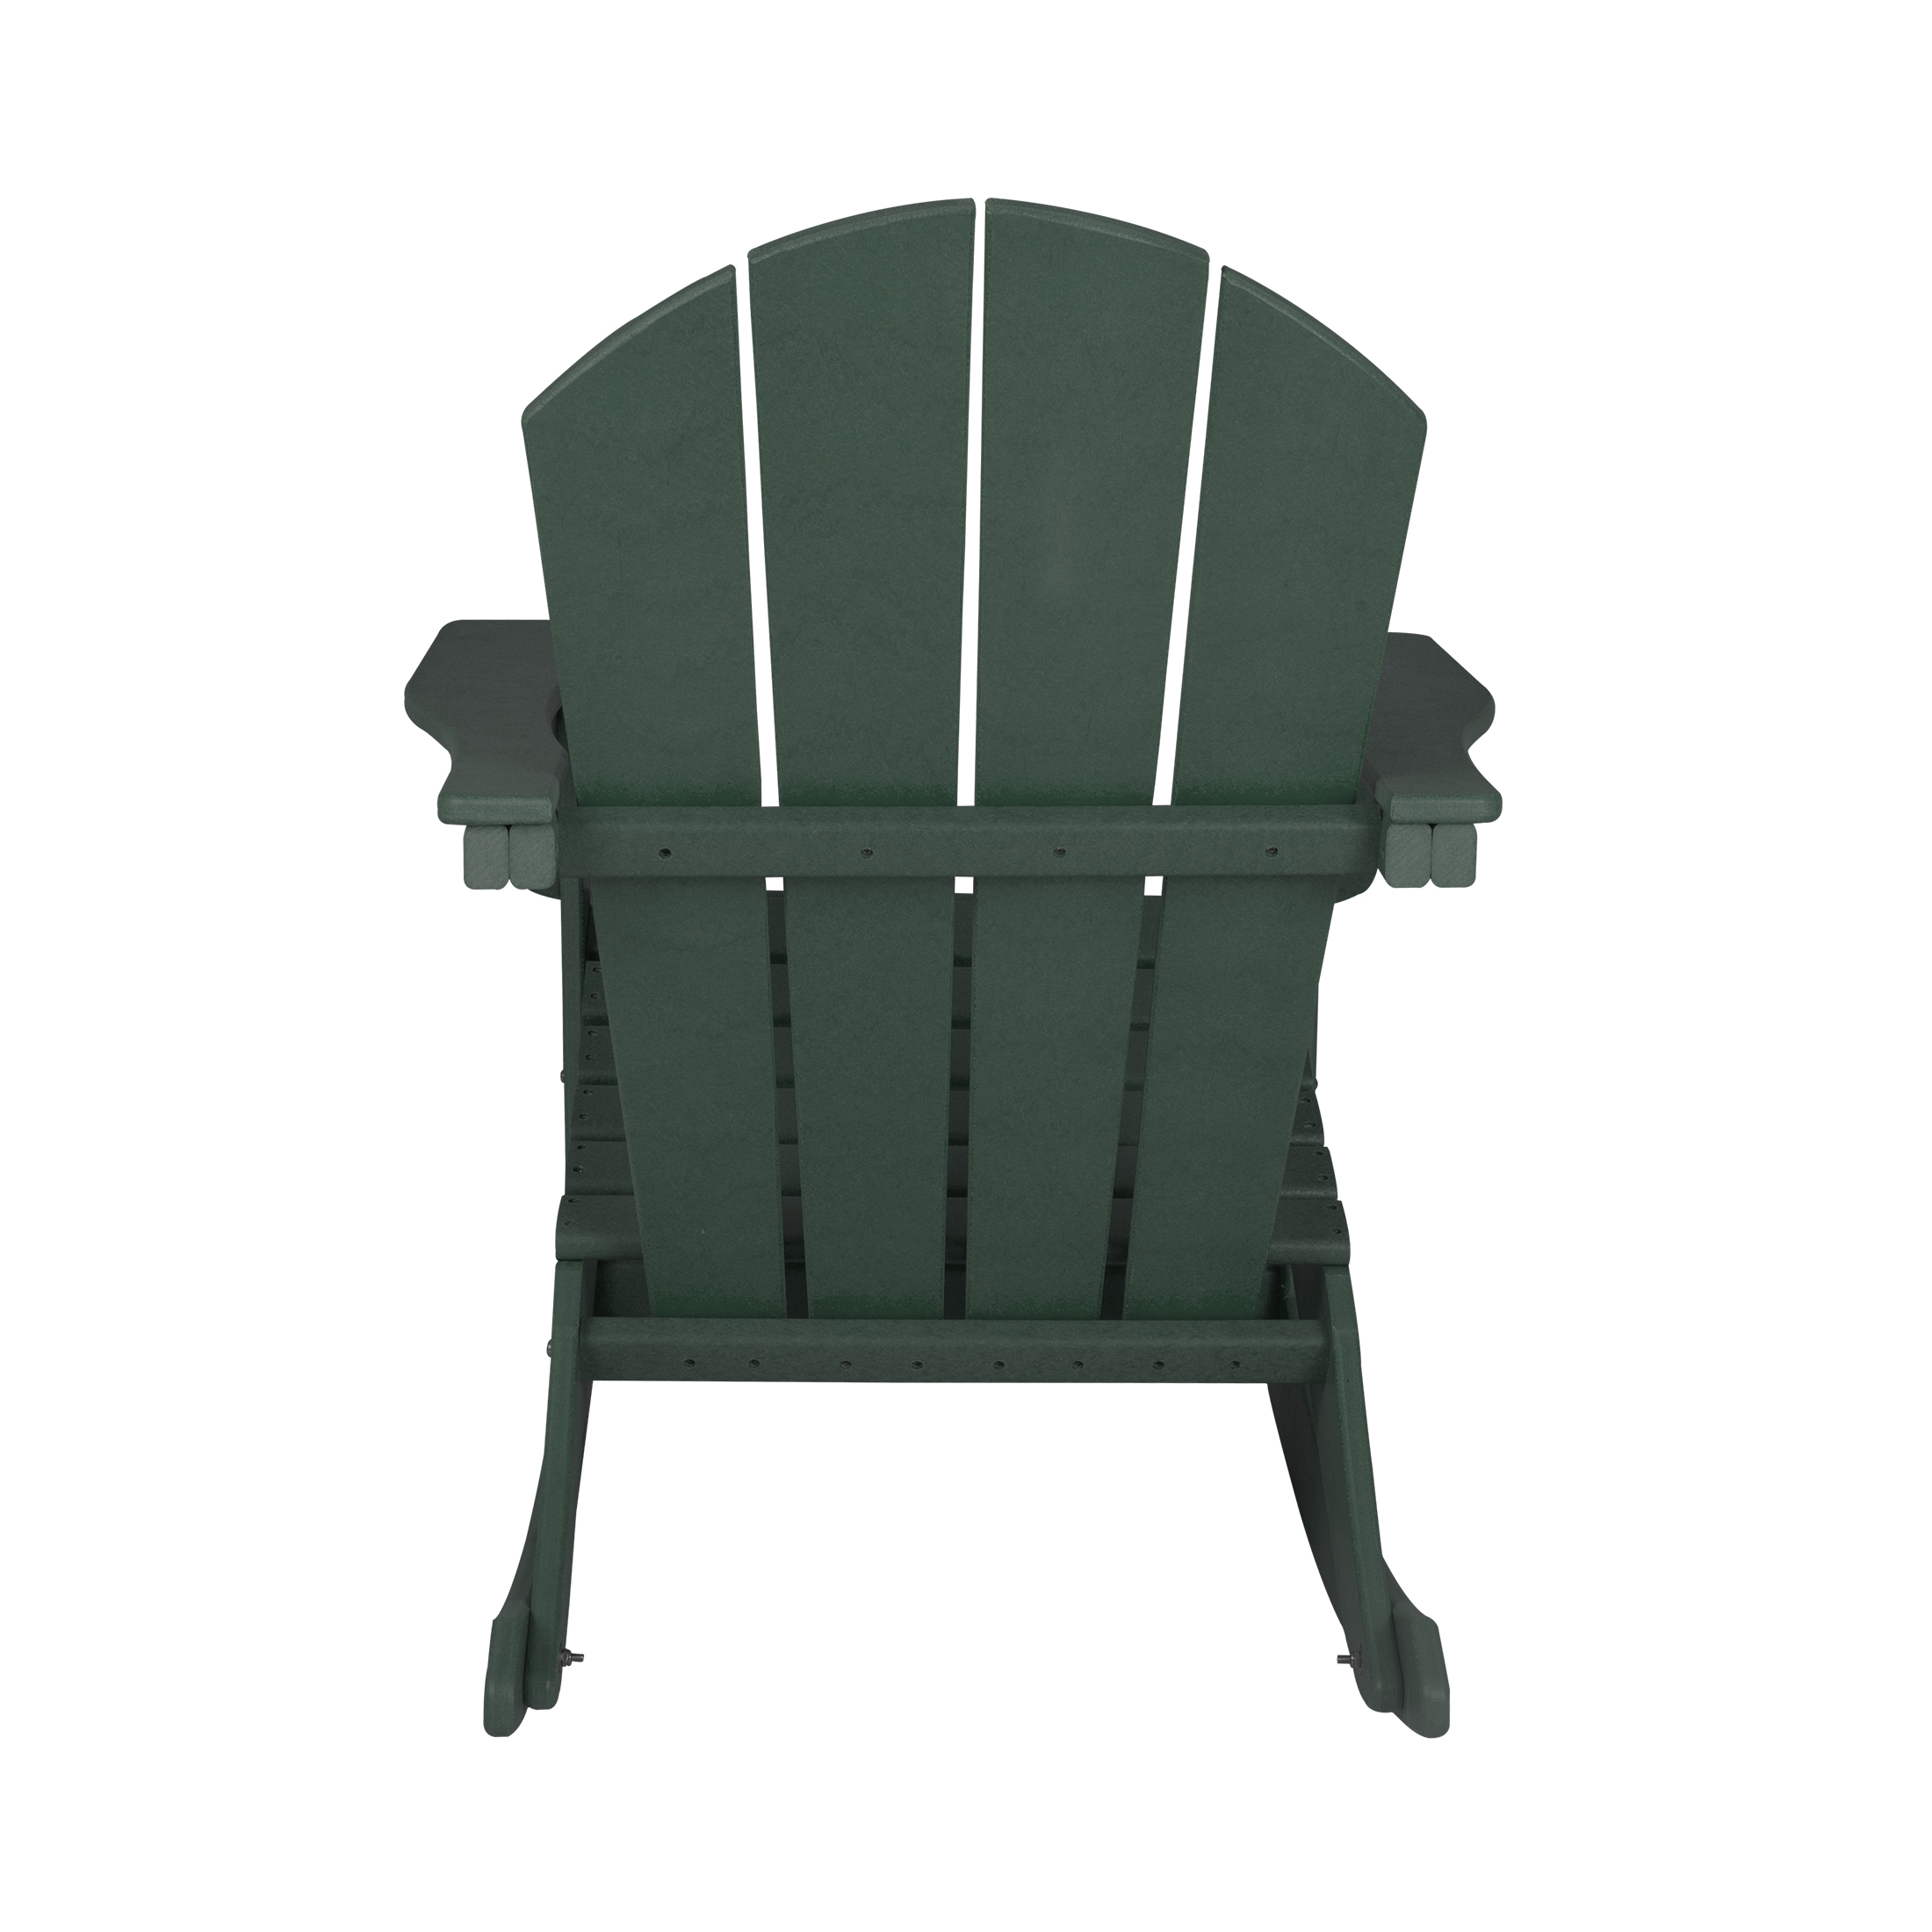 GARDEN Plastic Adirondack Rocking Chair for Outdoor Patio Porch Seating, Dark Green - image 3 of 7